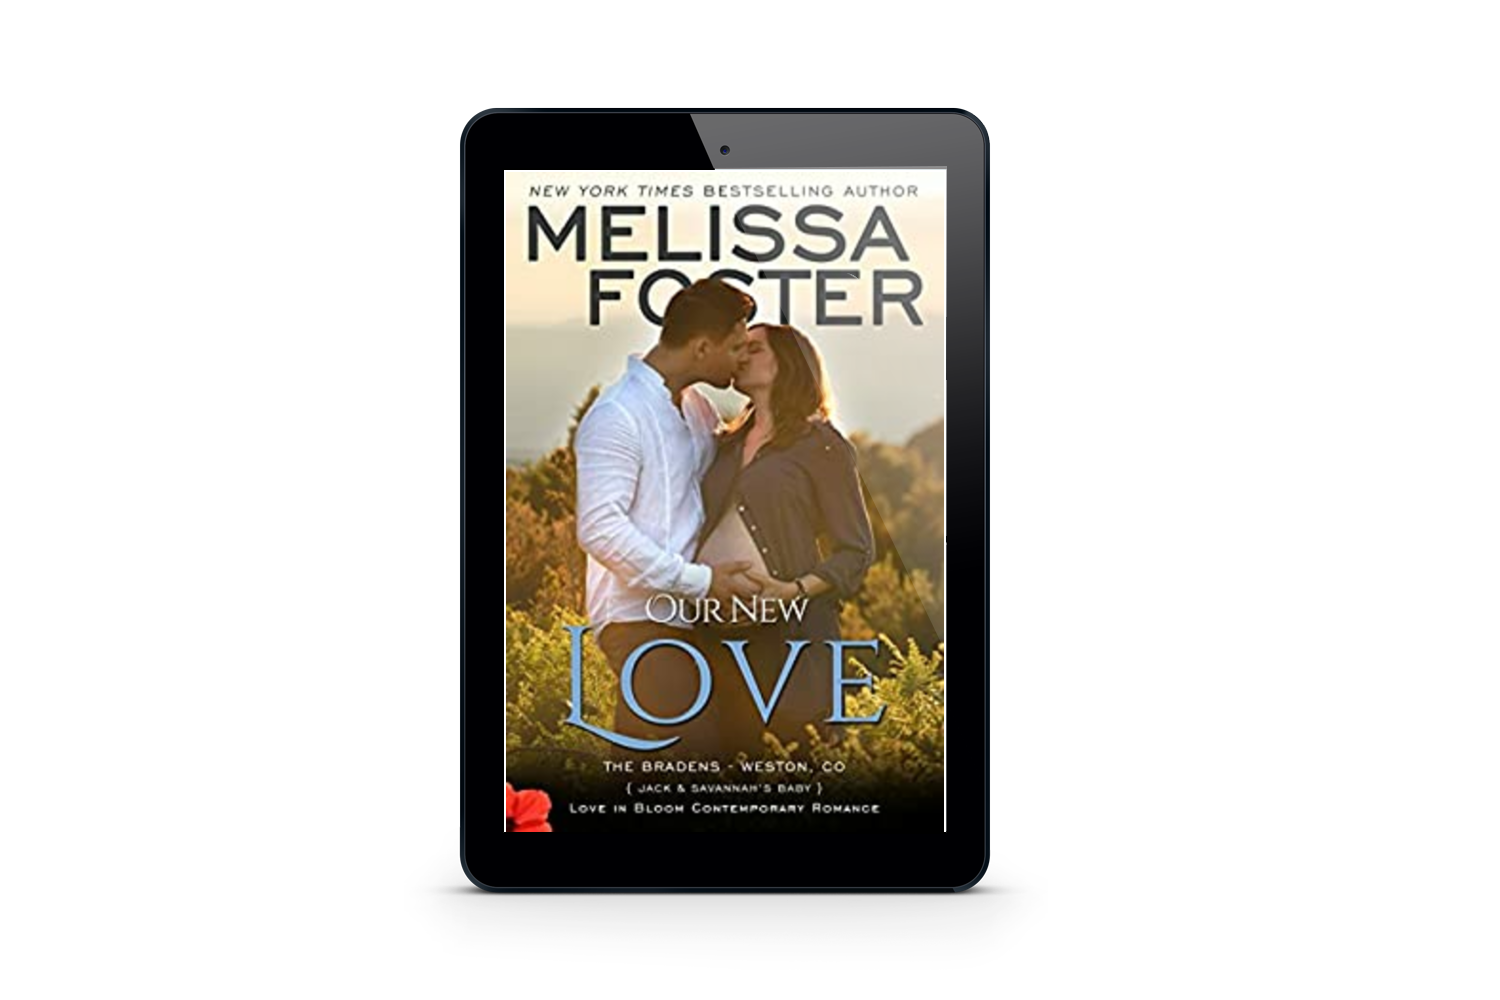 Our New Love (The Bradens, Novella Collection) Ebook